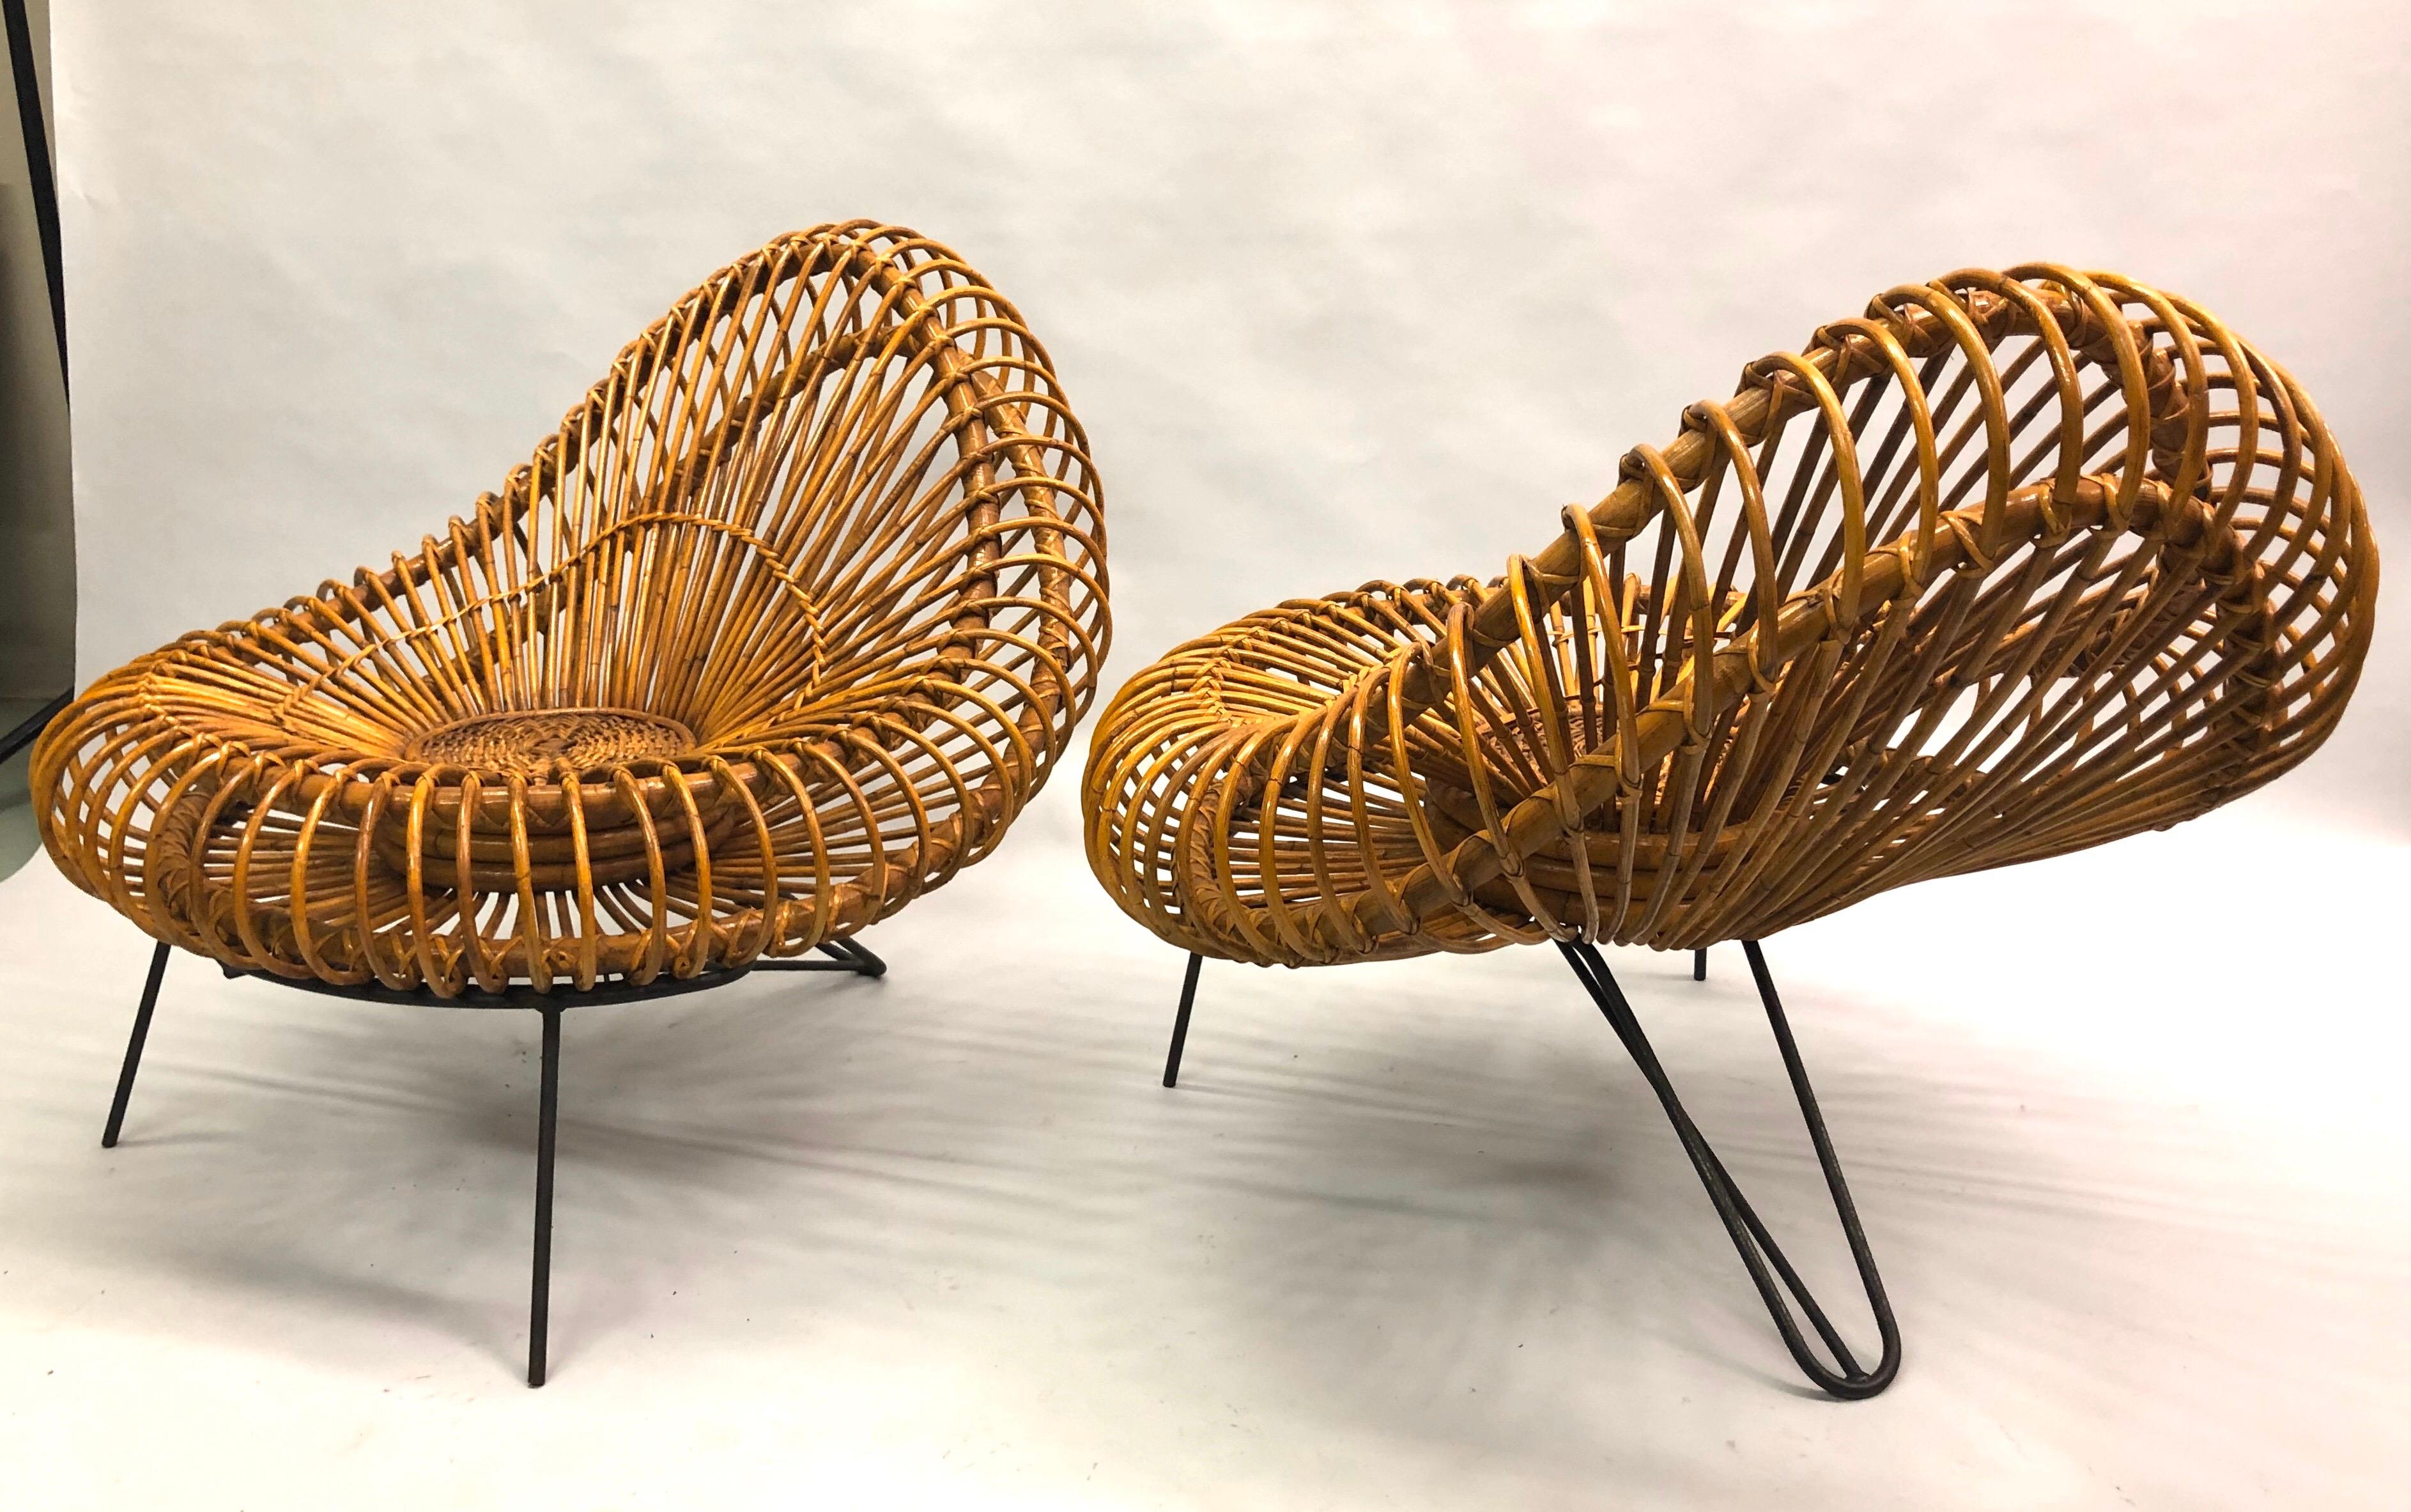 A confident, timeless, modern statement. An elegant and iconic pair of French Mid-Century Modern rattan basket lounge chairs / armchairs by Janine Abraham and Dirk Jan Rol, France, 1955. The original design incorporates the idea of a transparent